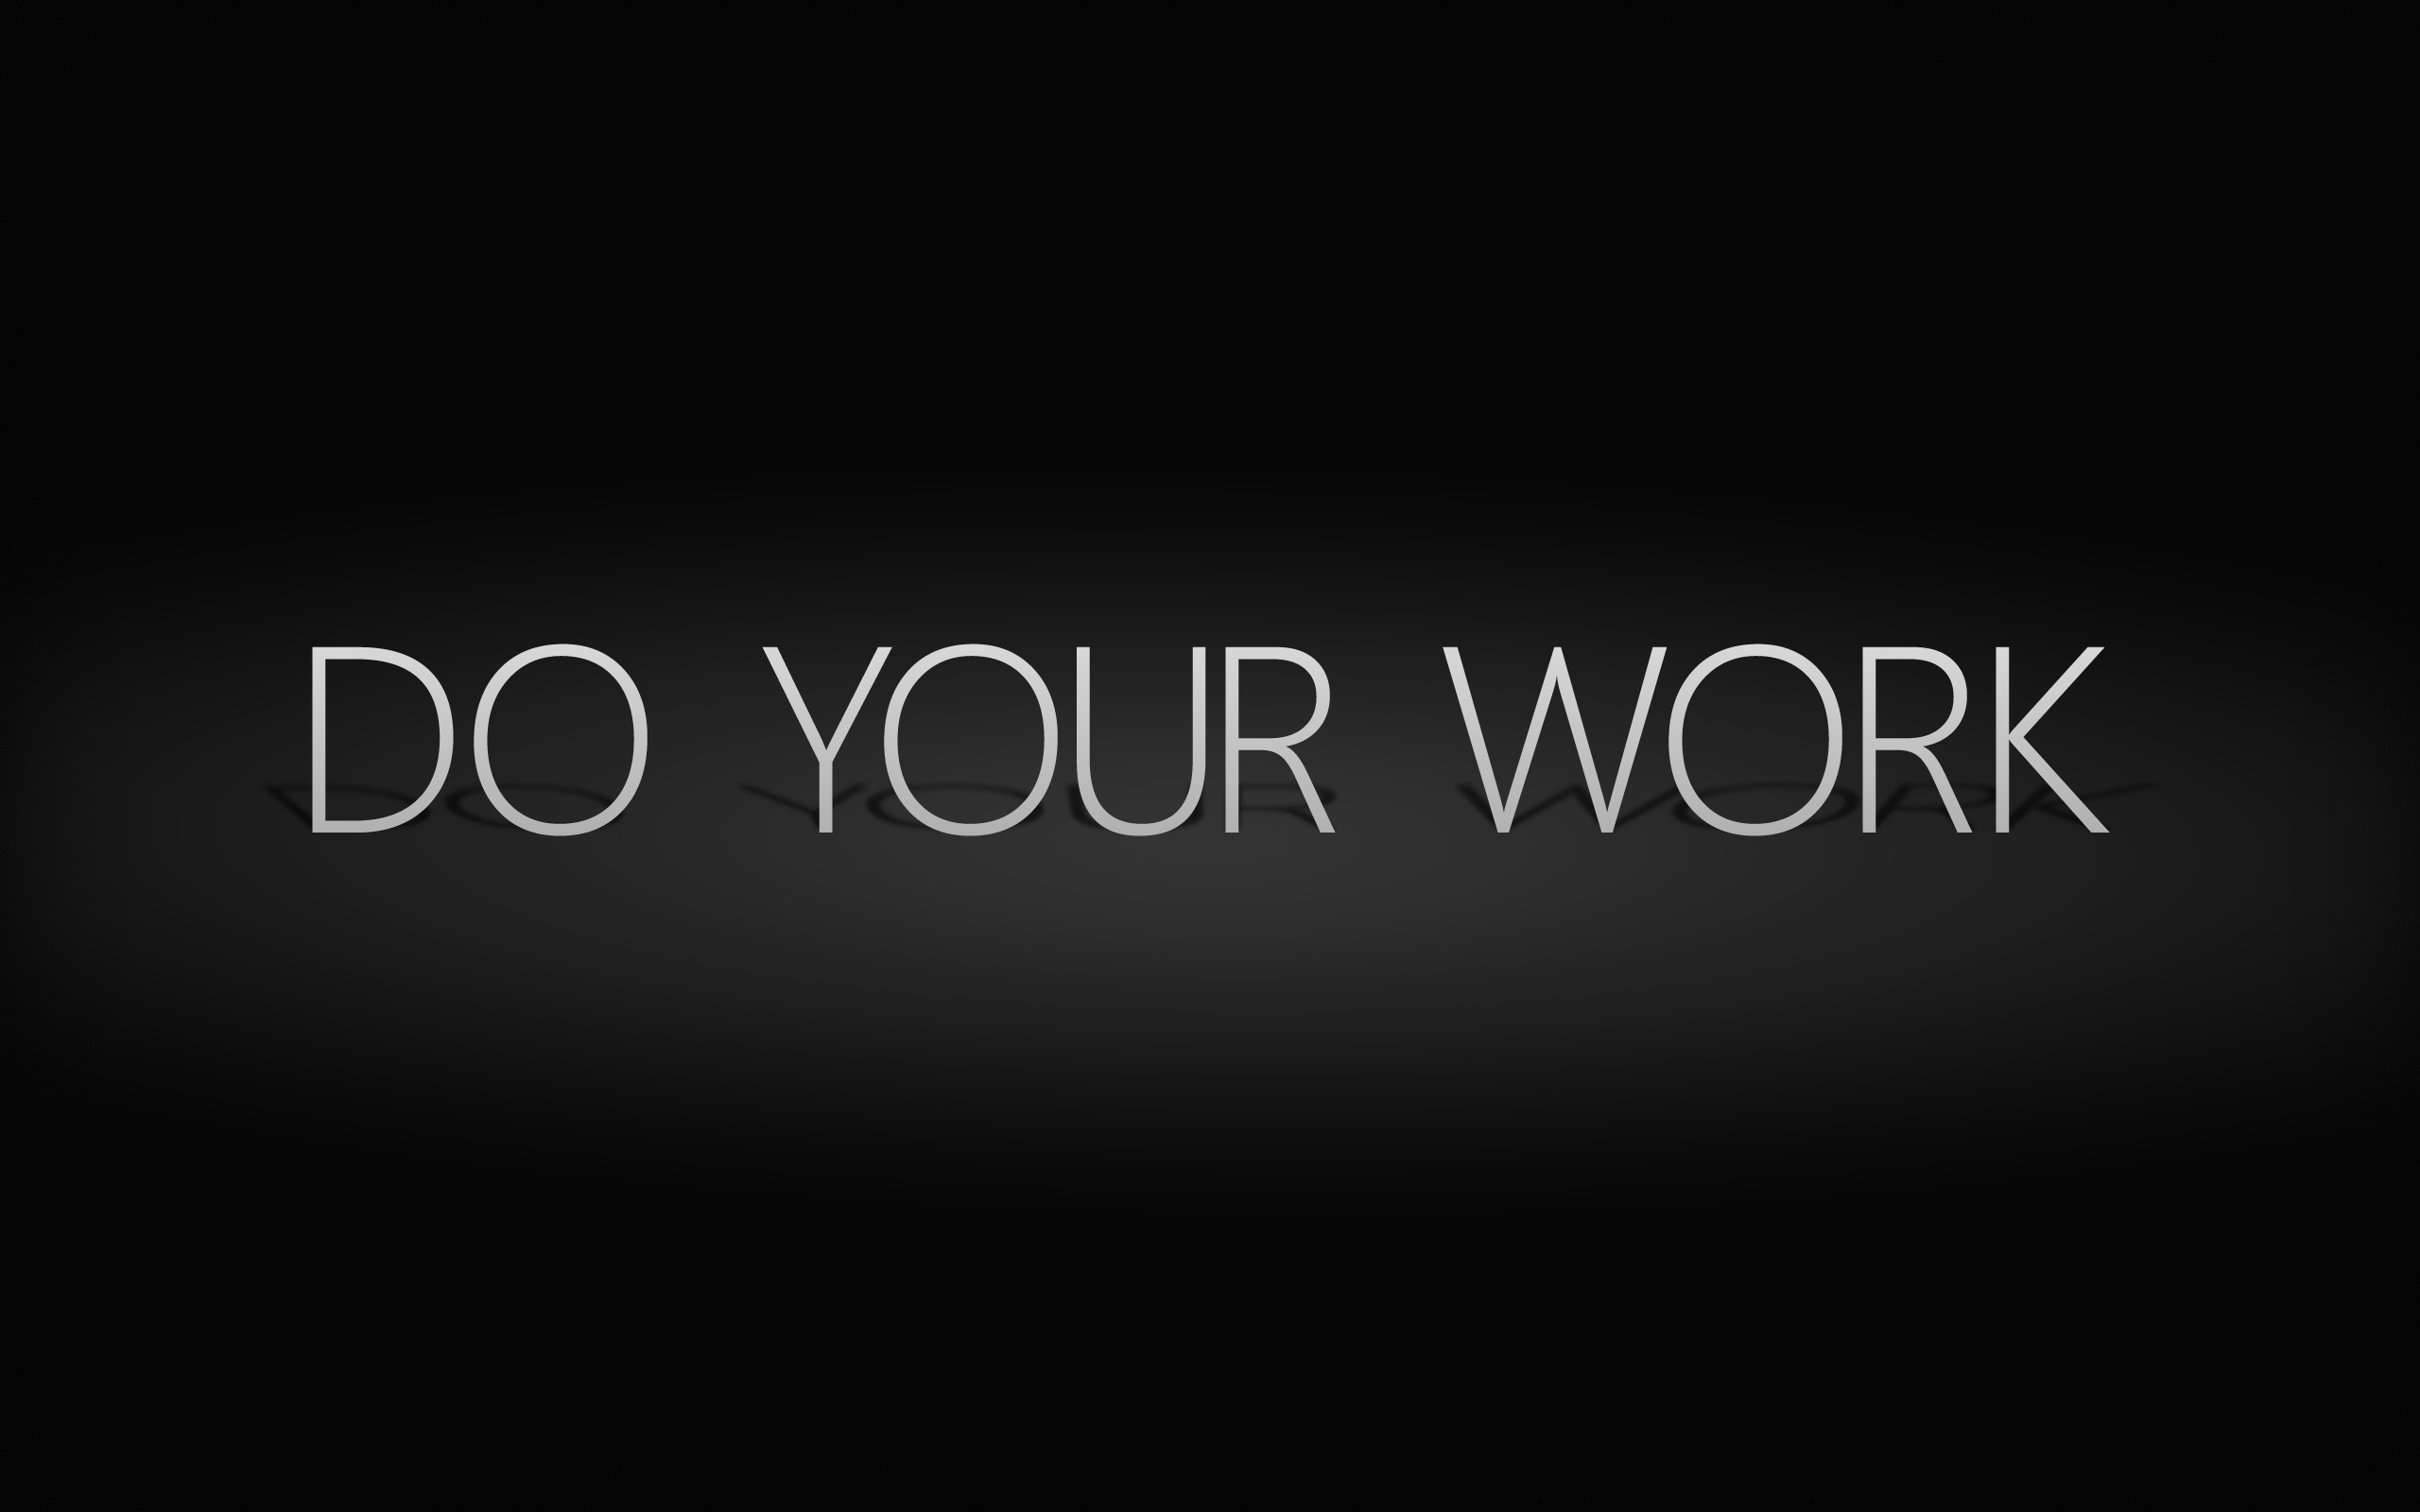 Do Your Work Image Quote Wallpaper High Resolution WallartHD